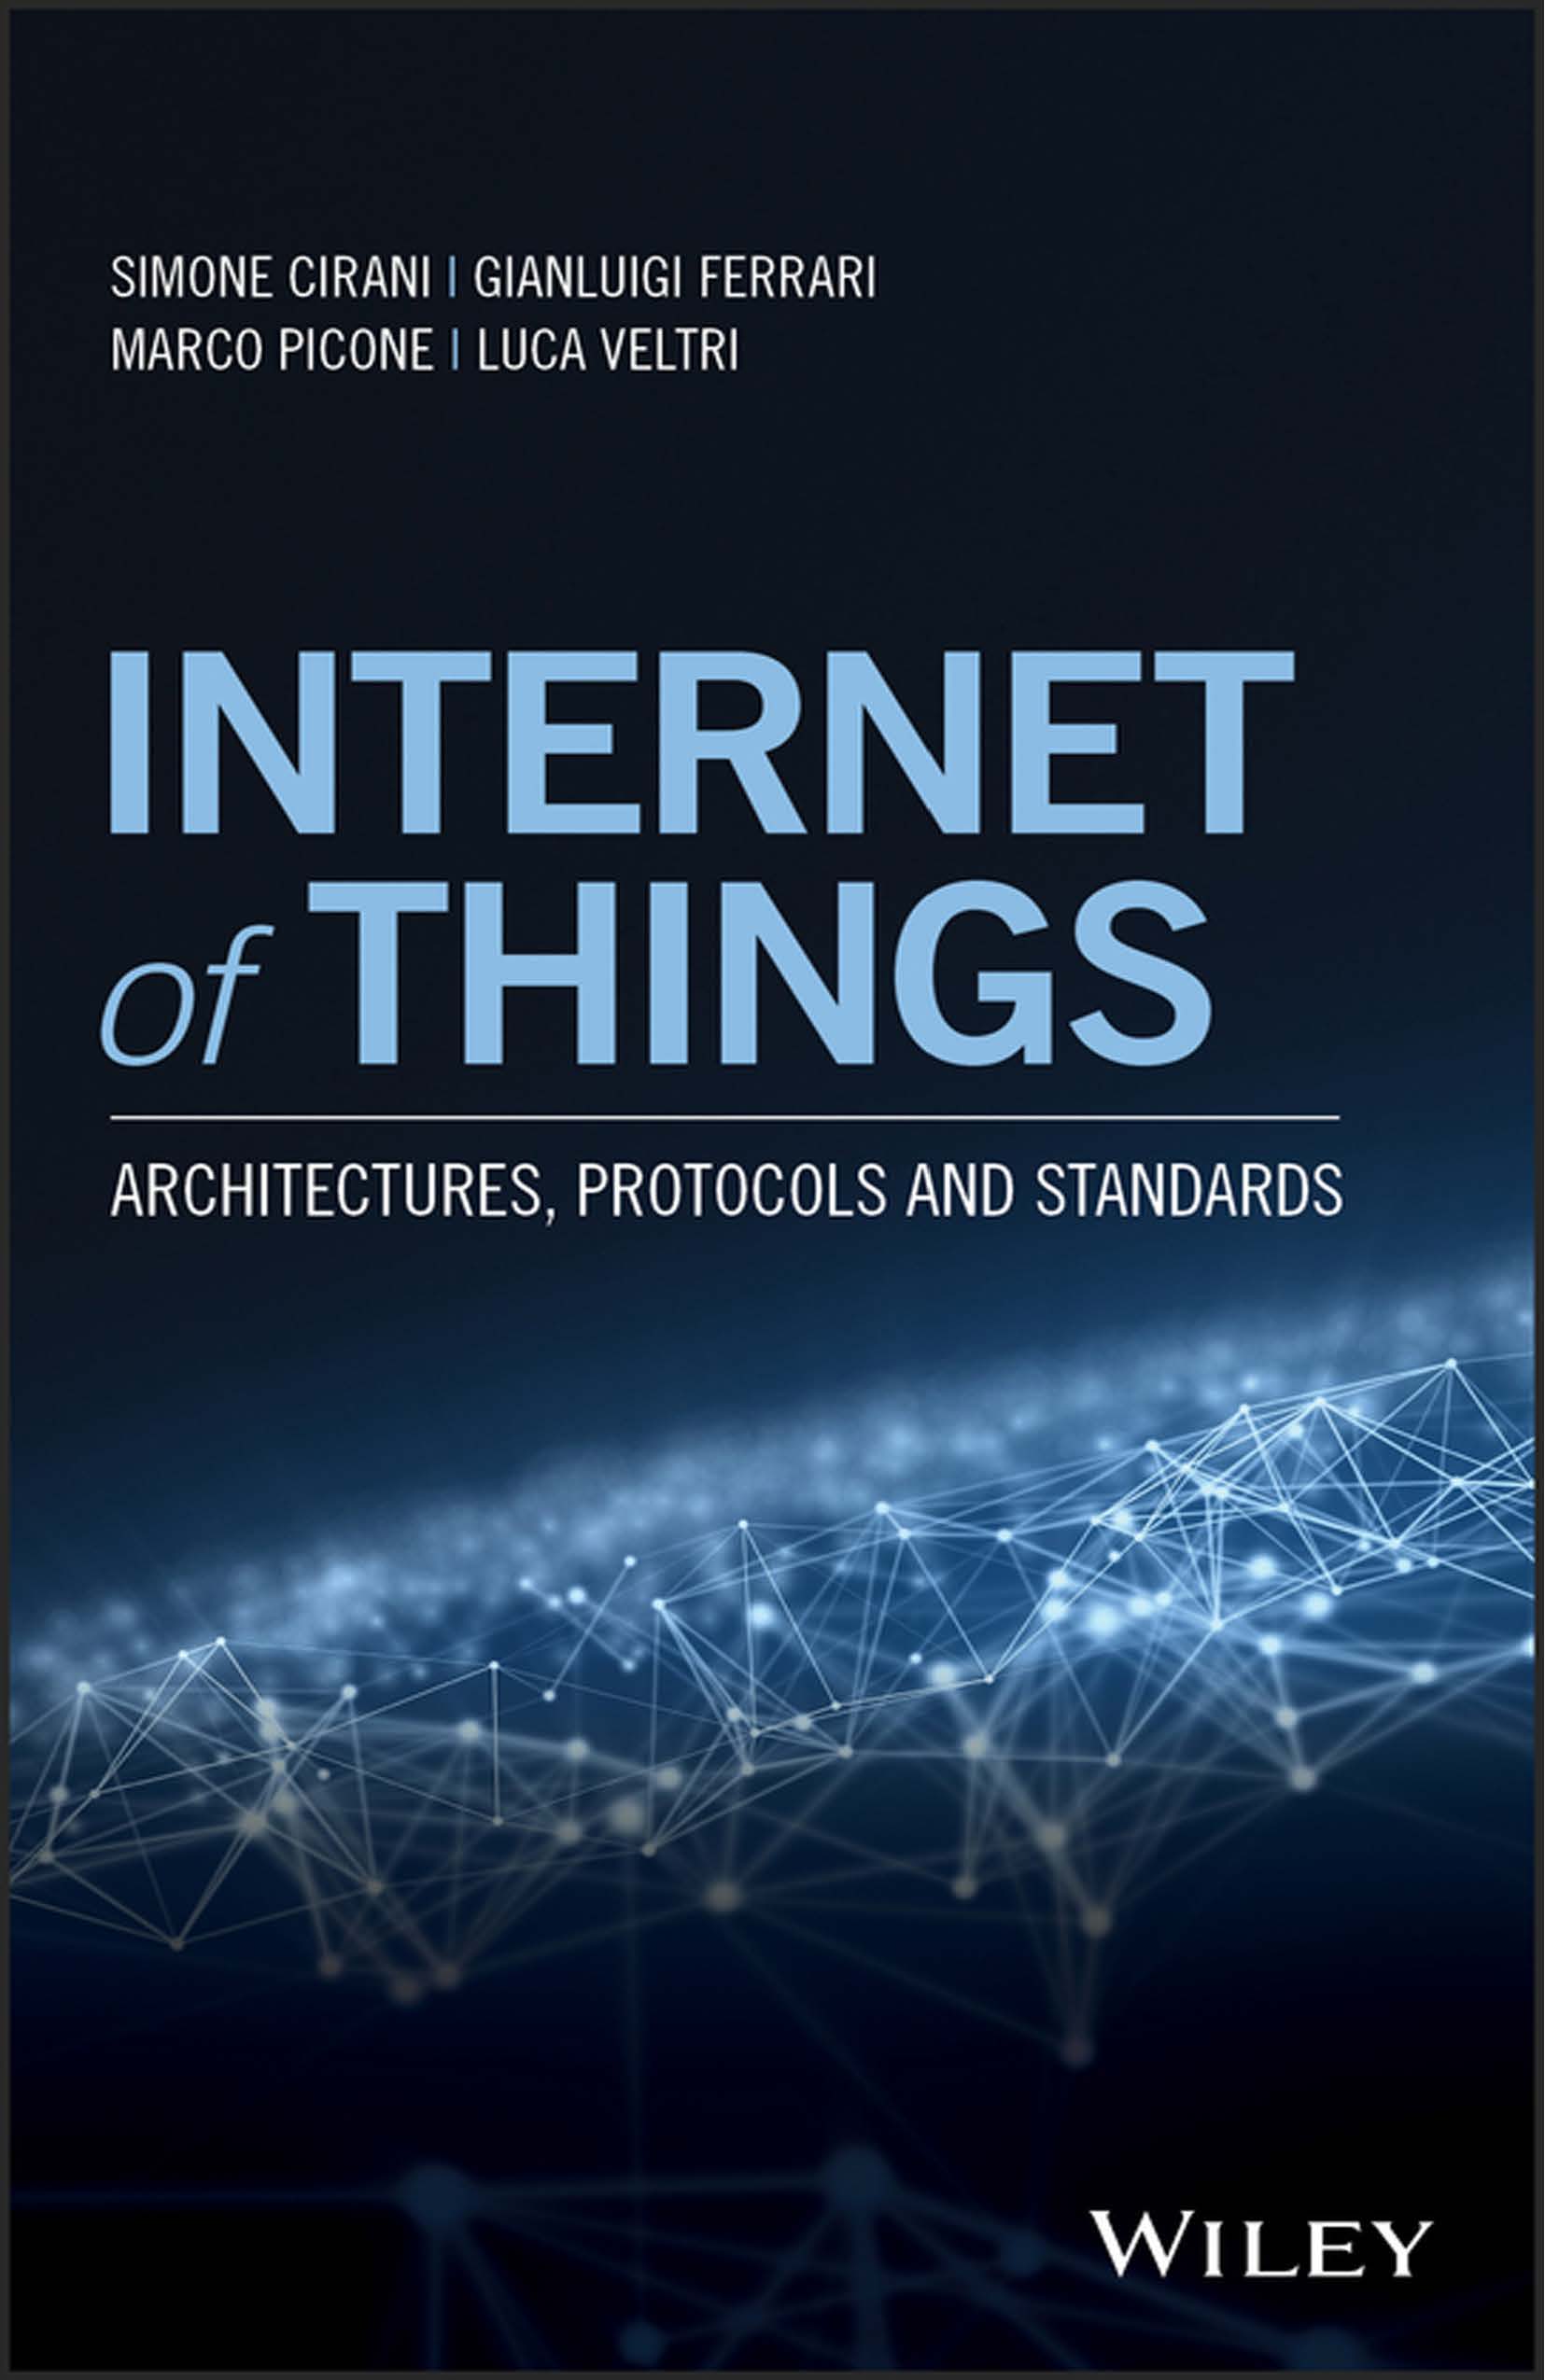 Internet of Things: Architectures, Protocols and Standards